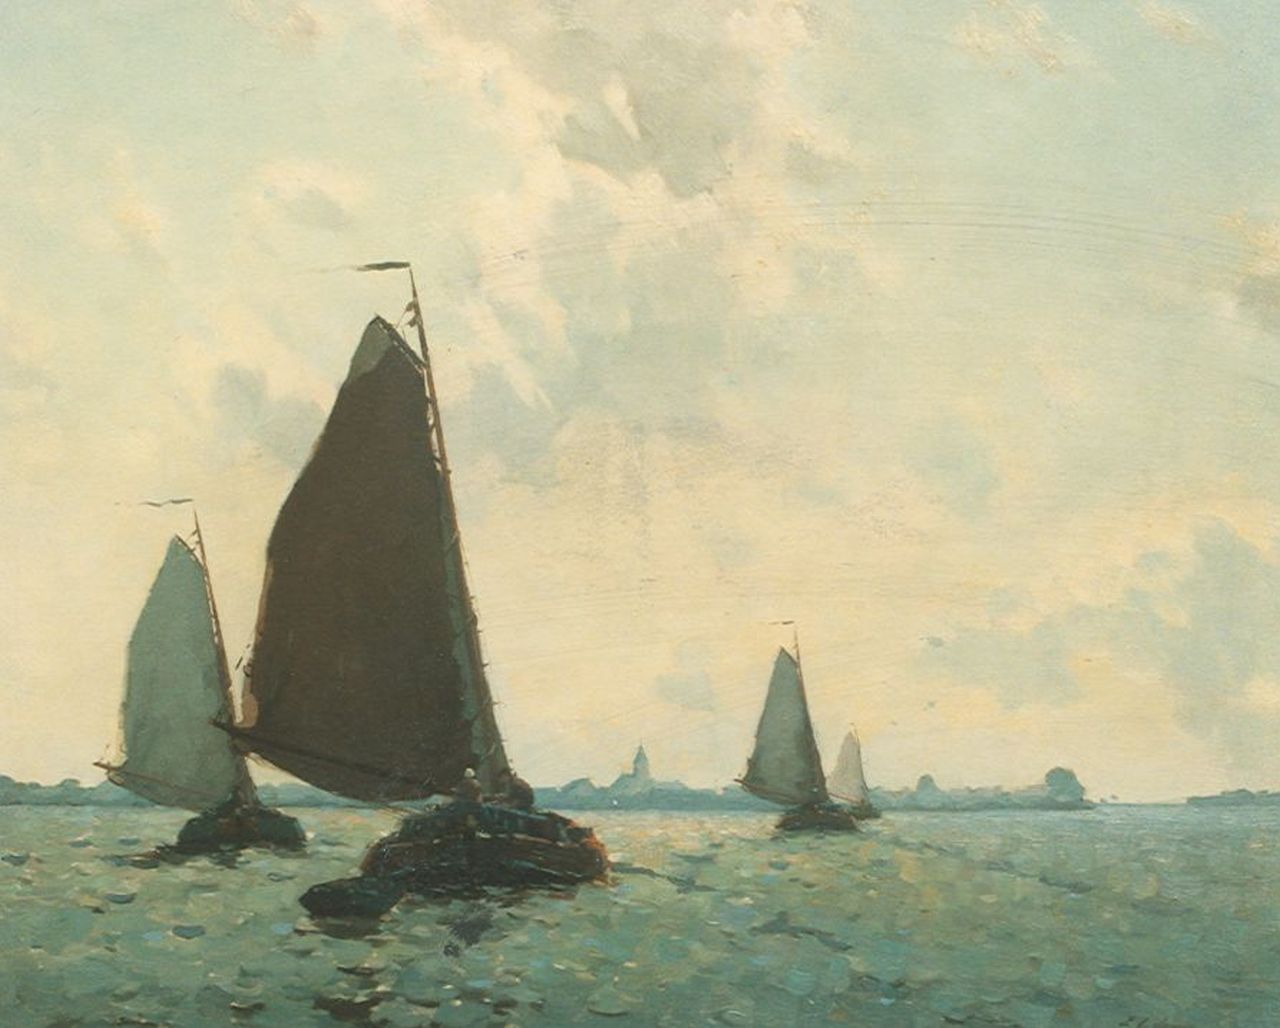 Ydema E.  | Egnatius Ydema, Shipping in full sail, with Oudega in the distance, oil on canvas 64.0 x 76.0 cm, signed l.r.